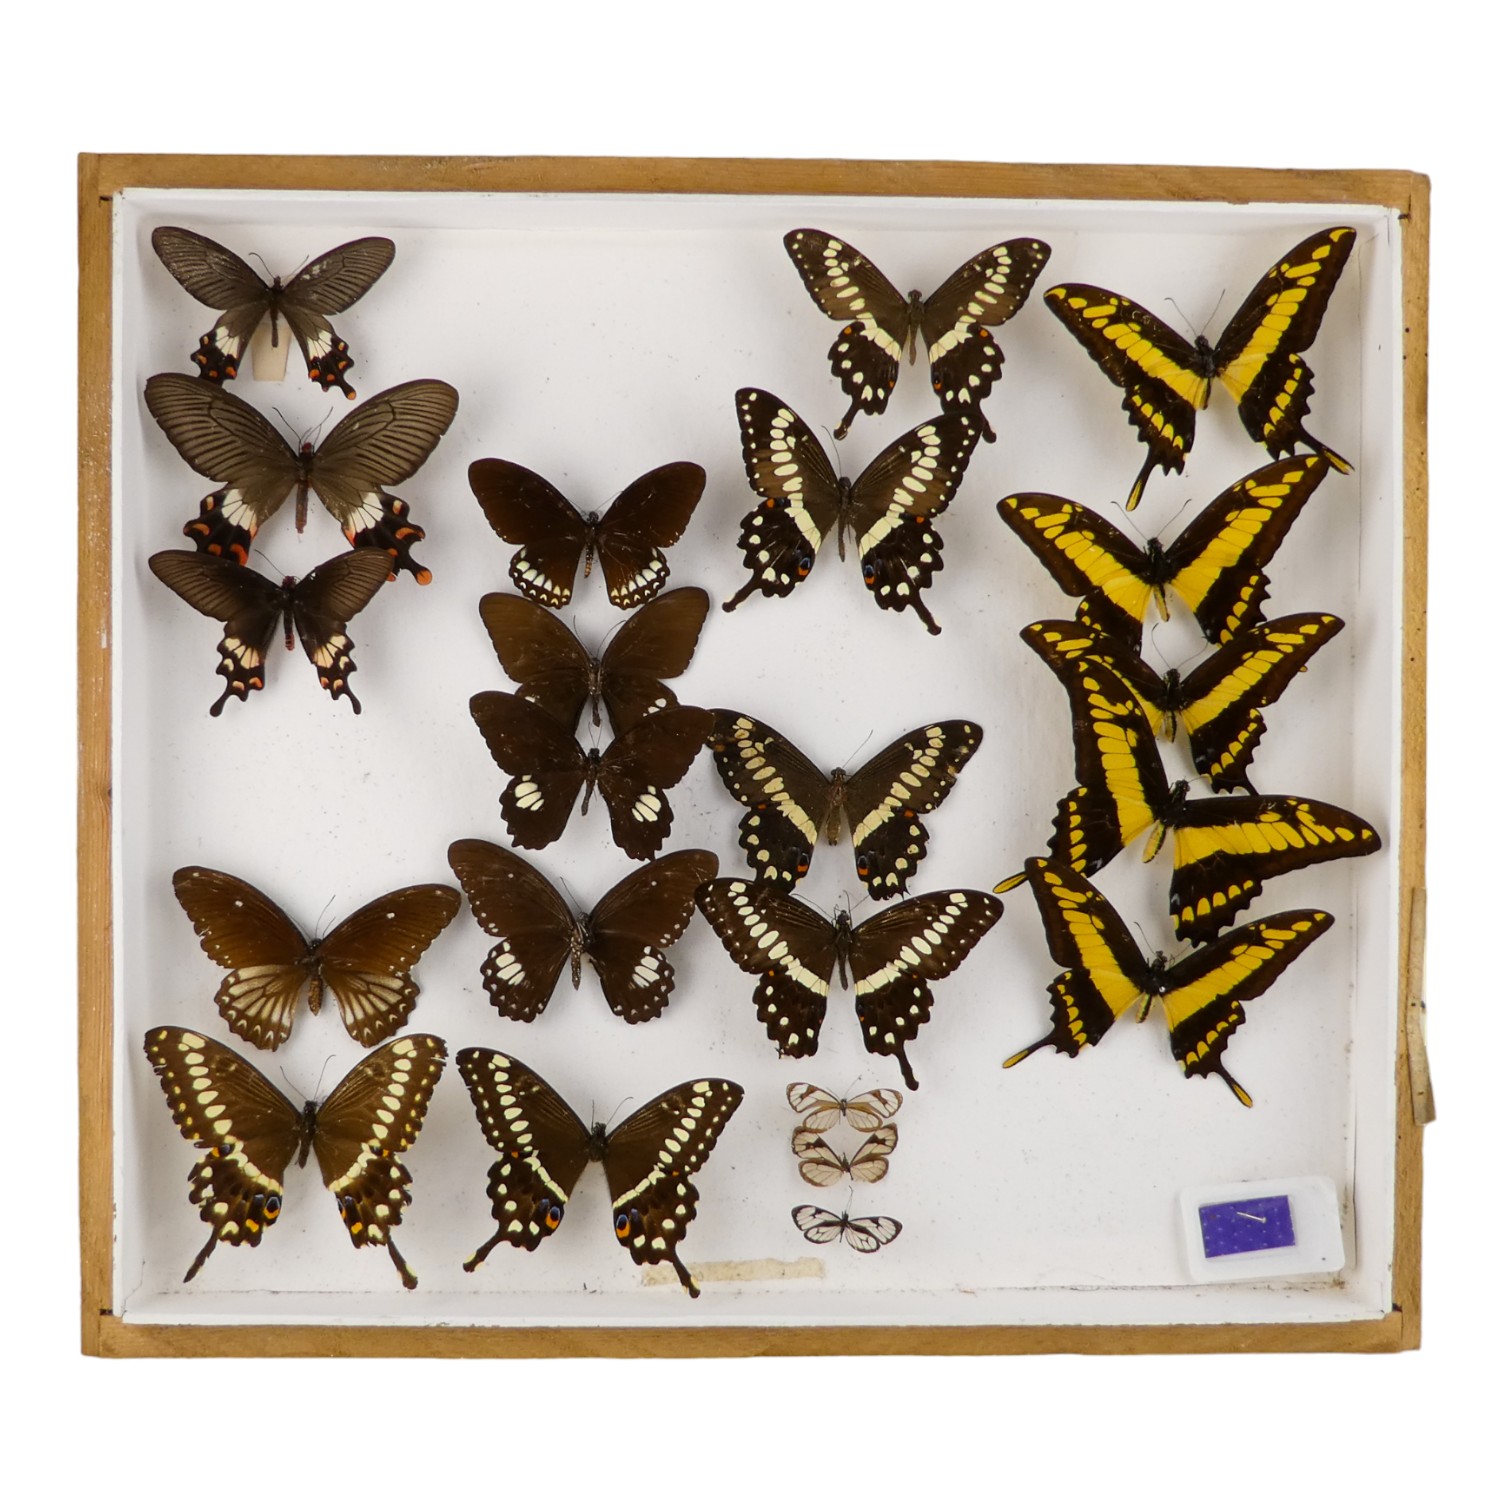 A case of butterflies in four rows - including King Swallowtail, Central Emperor Swallowtail and